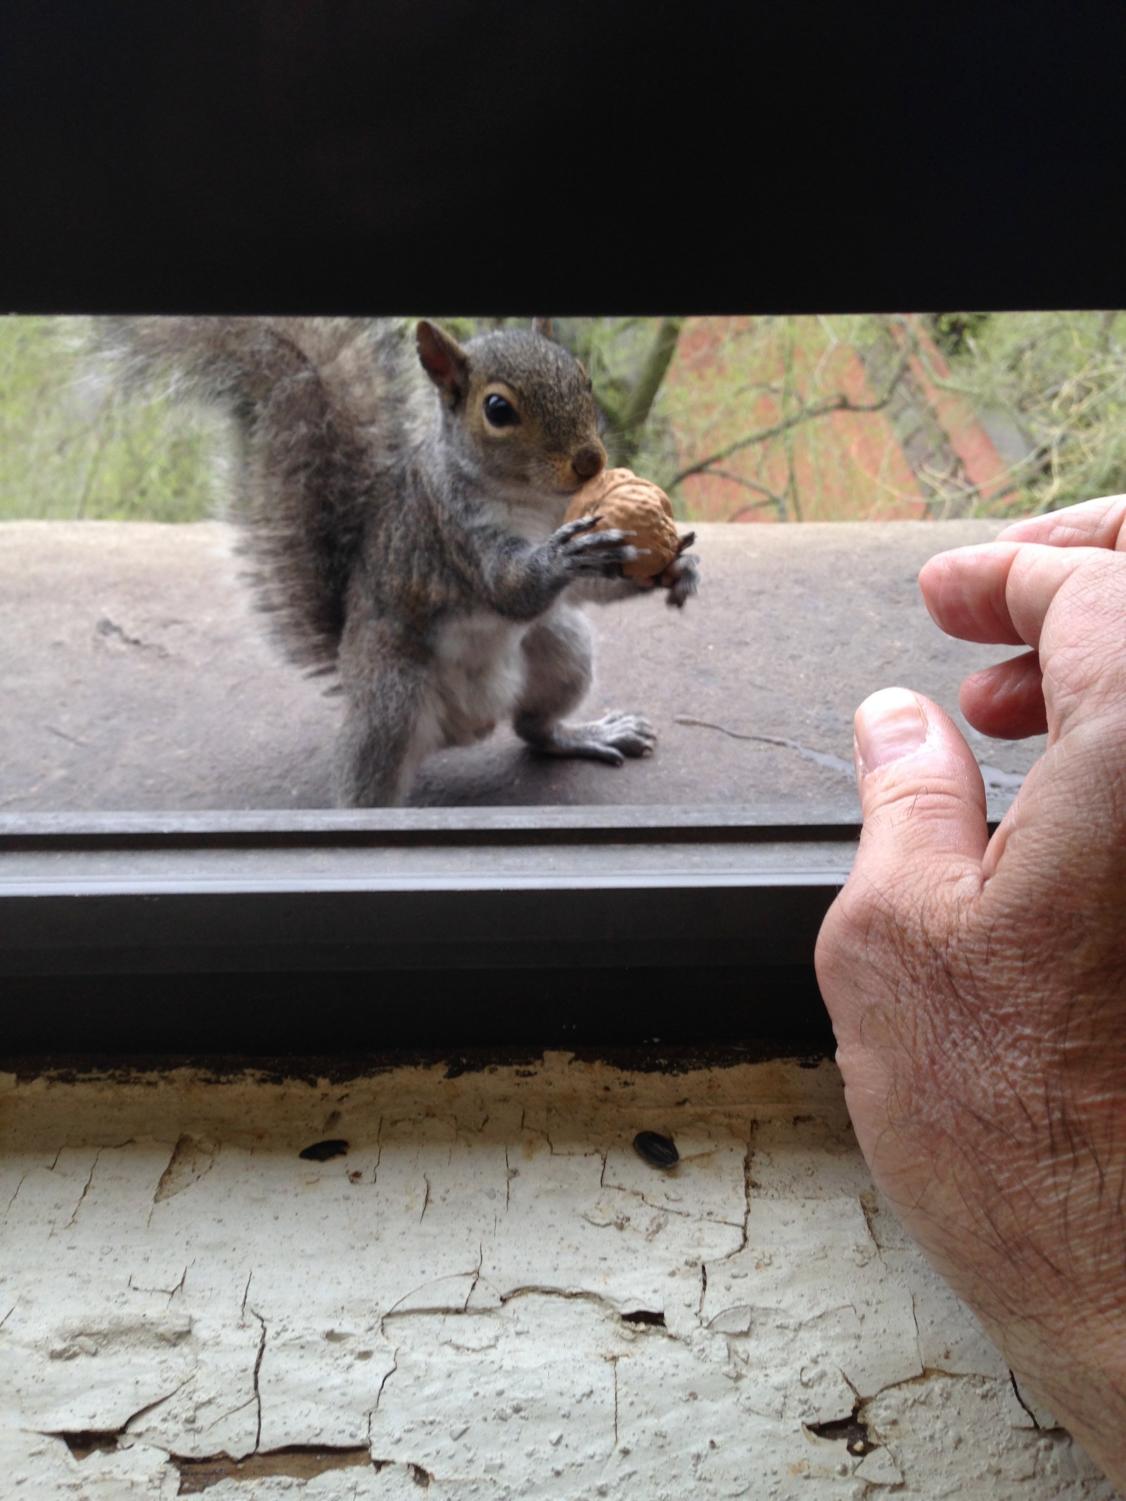 Coyne, a self-described animal lover, feeds a squirrel from the window of his lab, overlooking the quad.